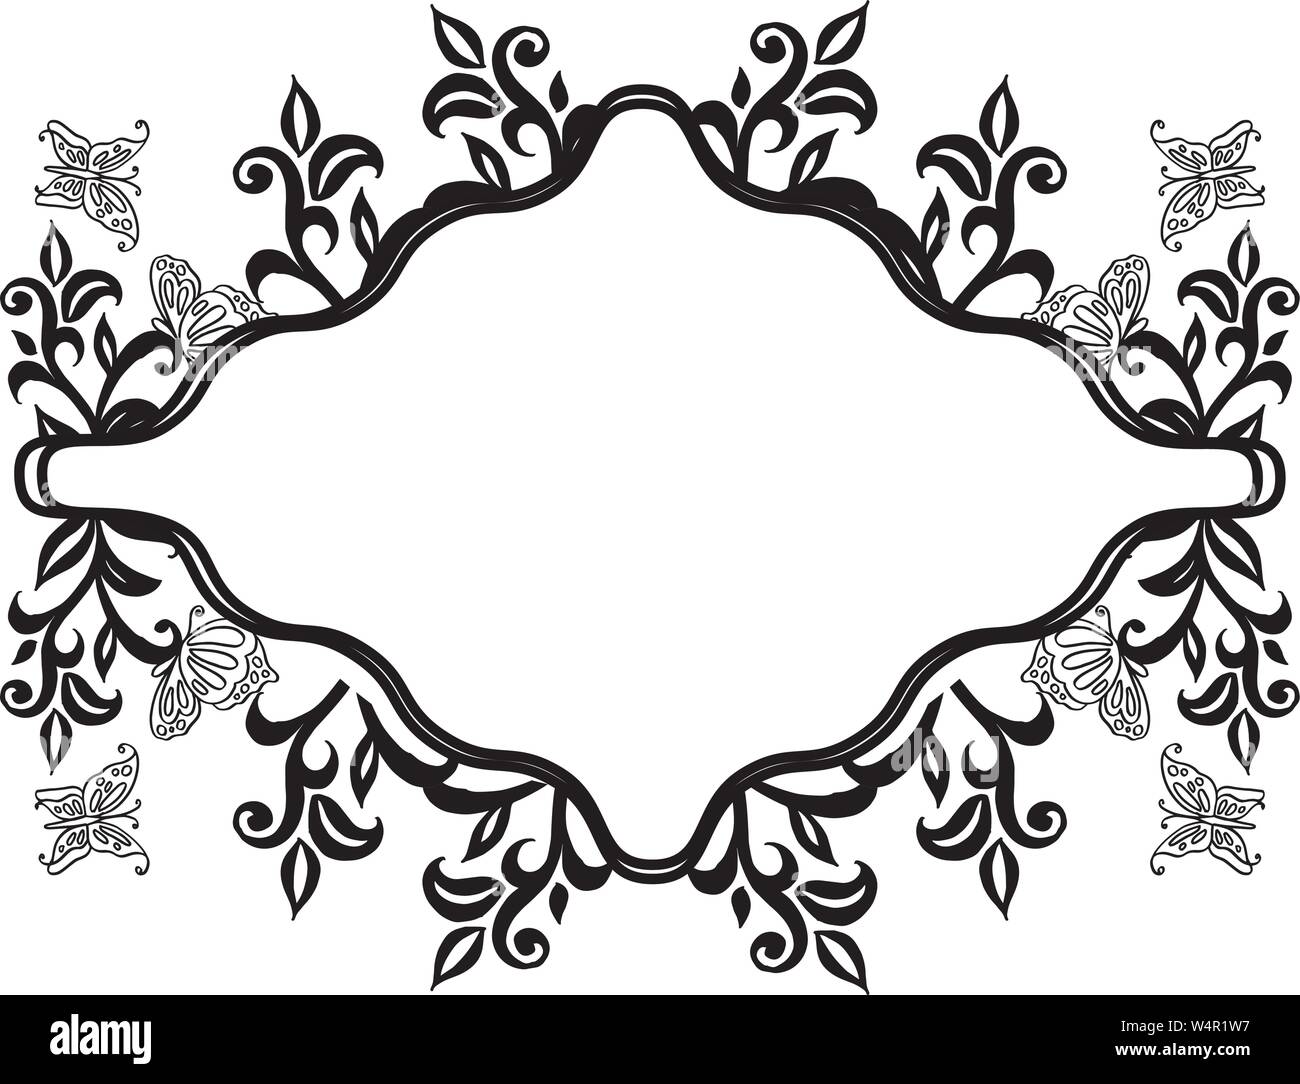 Design element isolated on white background, with drawing of floral ...